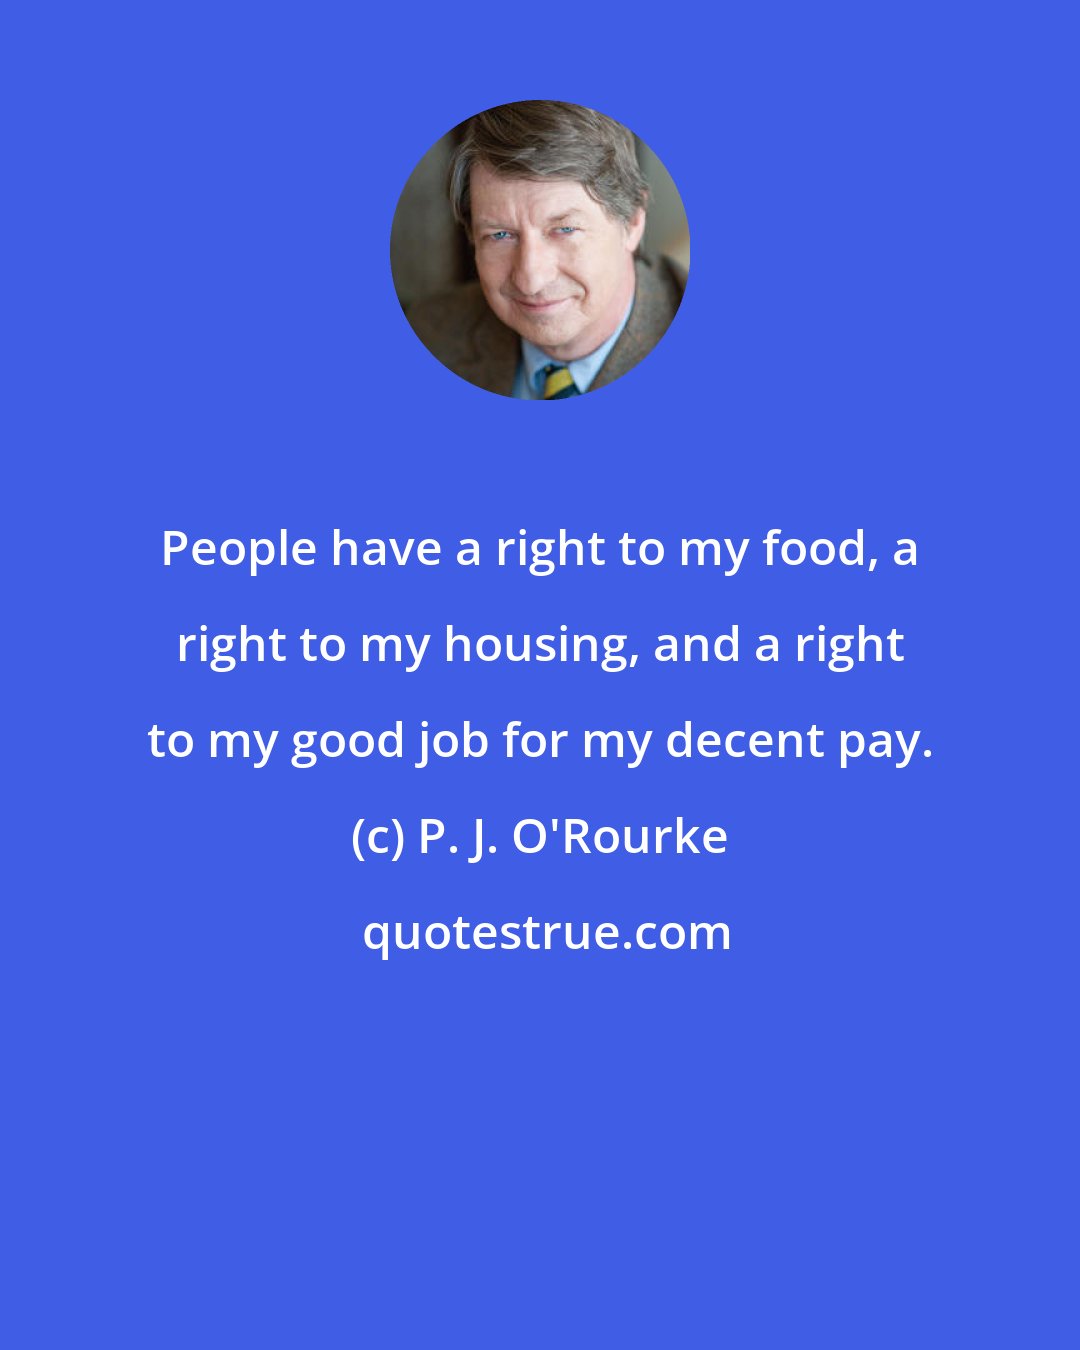 P. J. O'Rourke: People have a right to my food, a right to my housing, and a right to my good job for my decent pay.